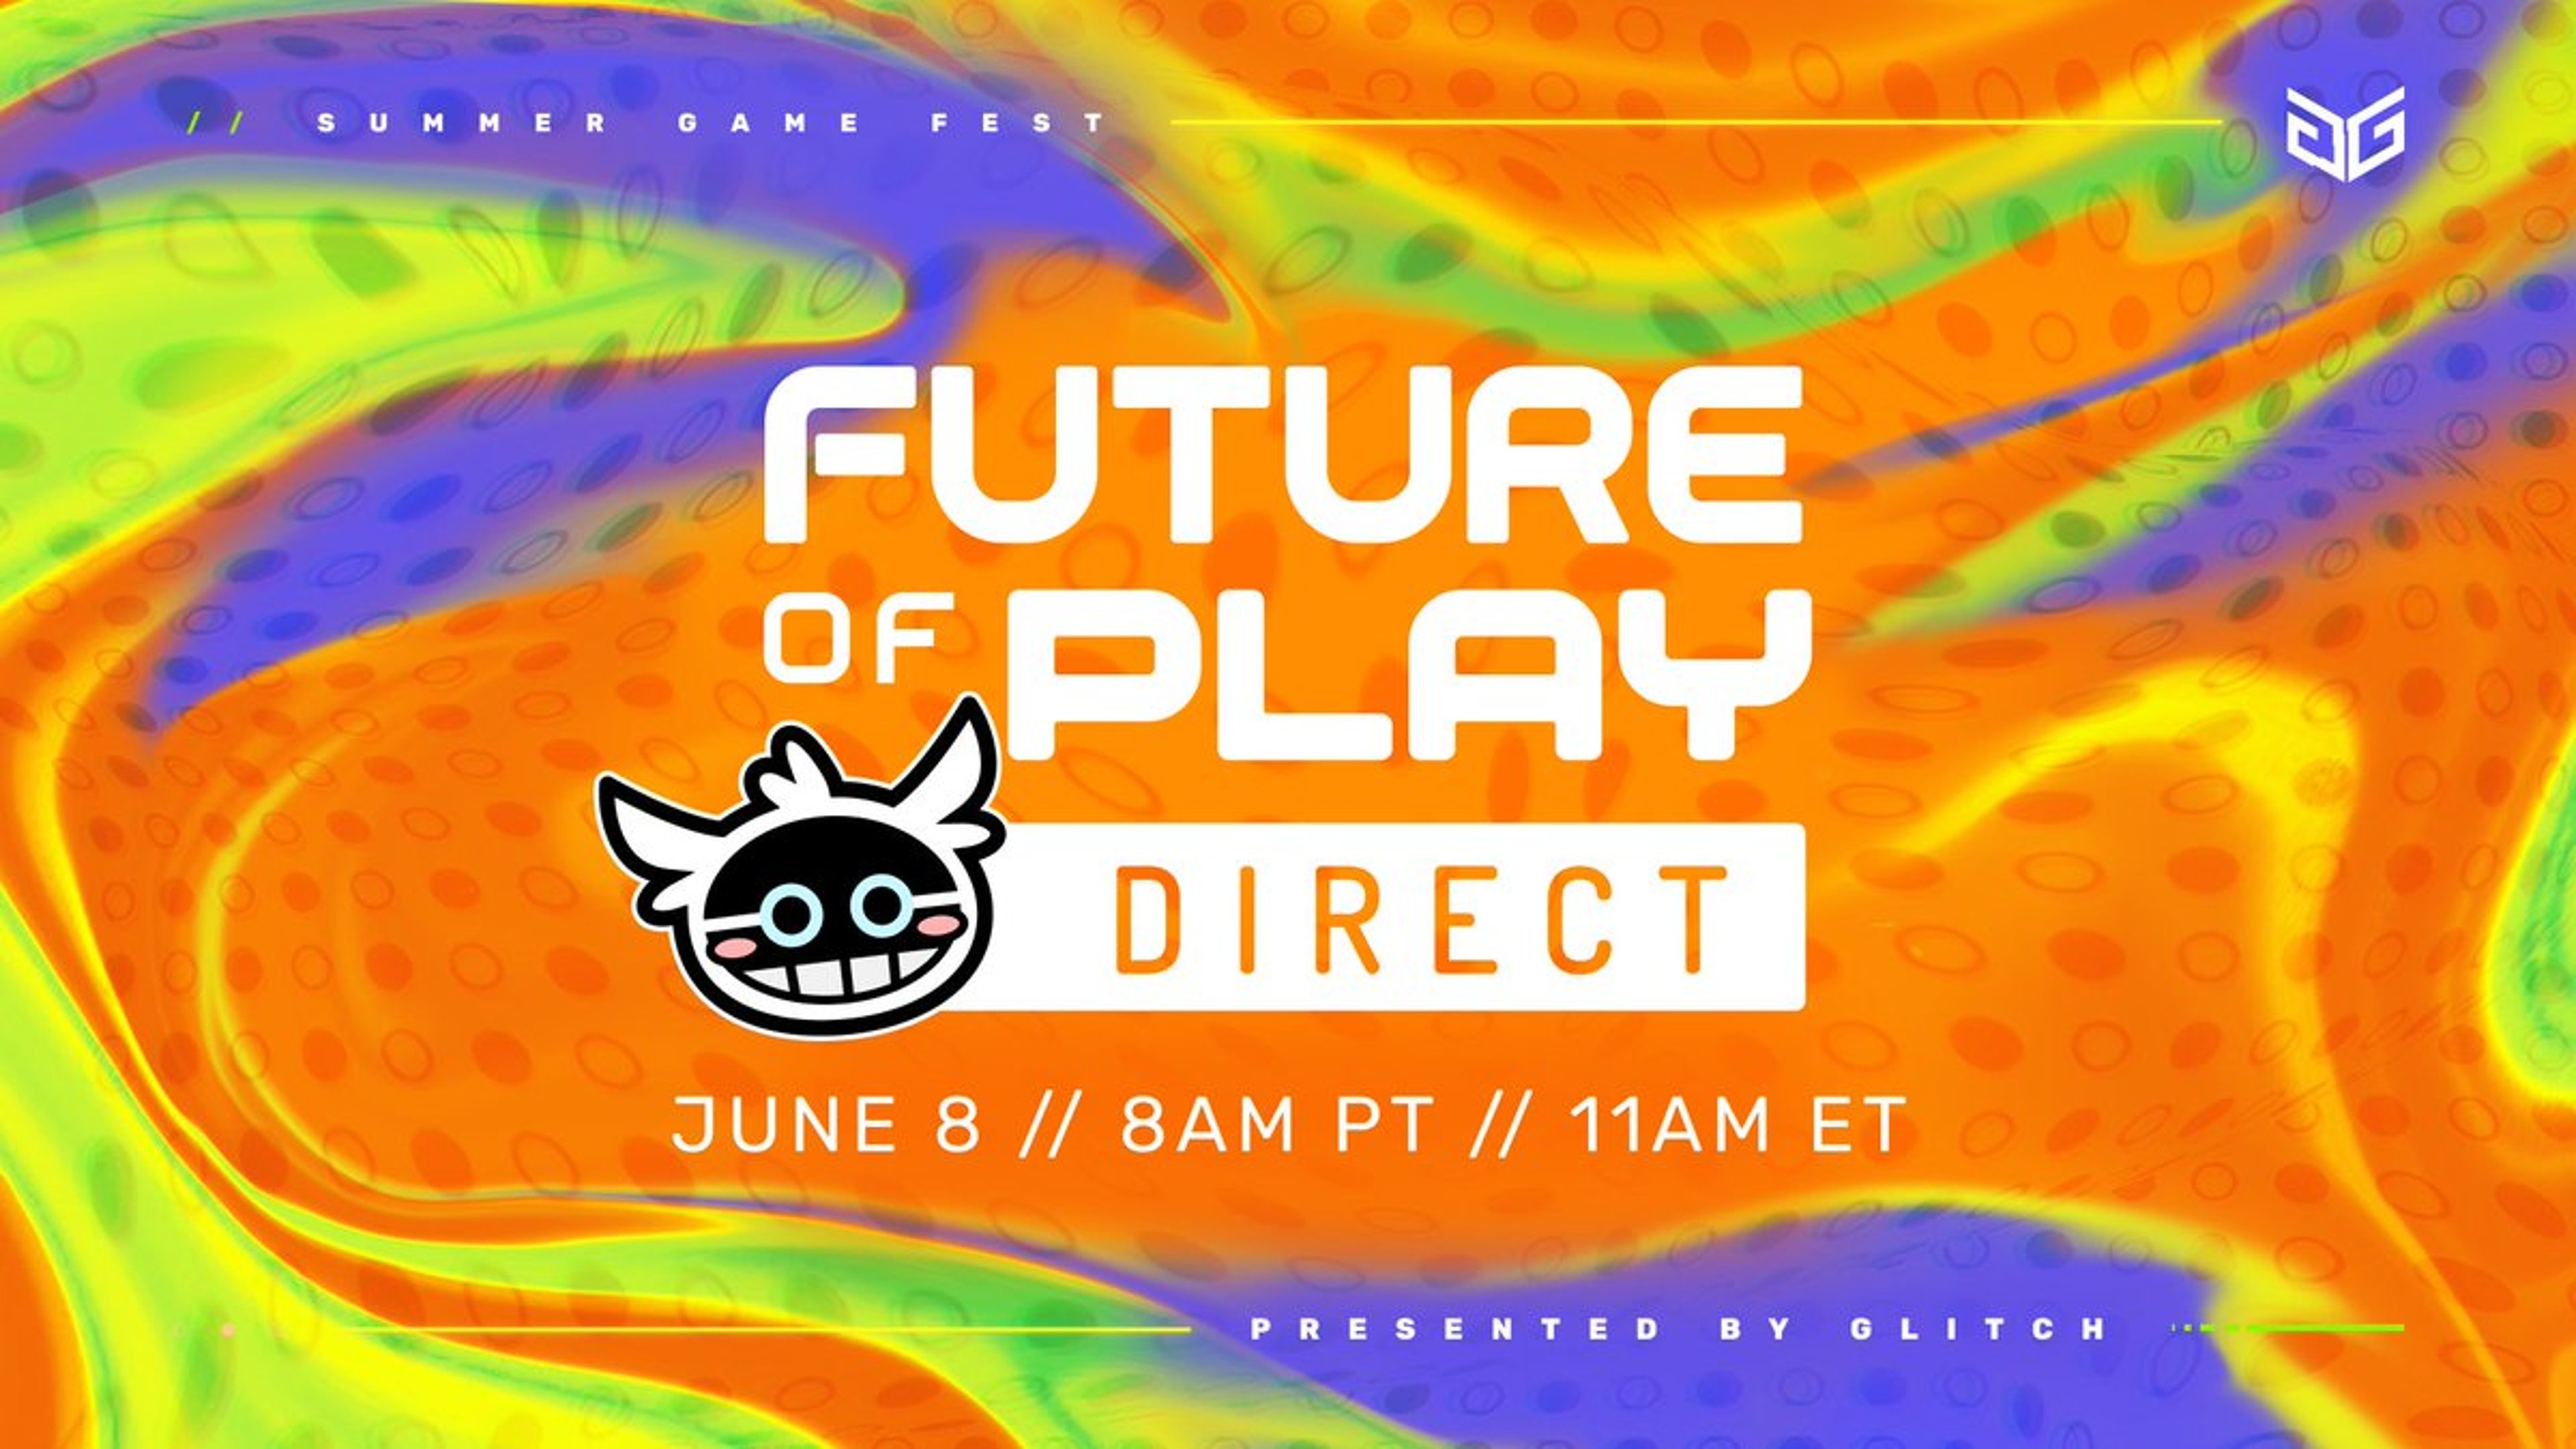 Summer Game Event - Future of Play